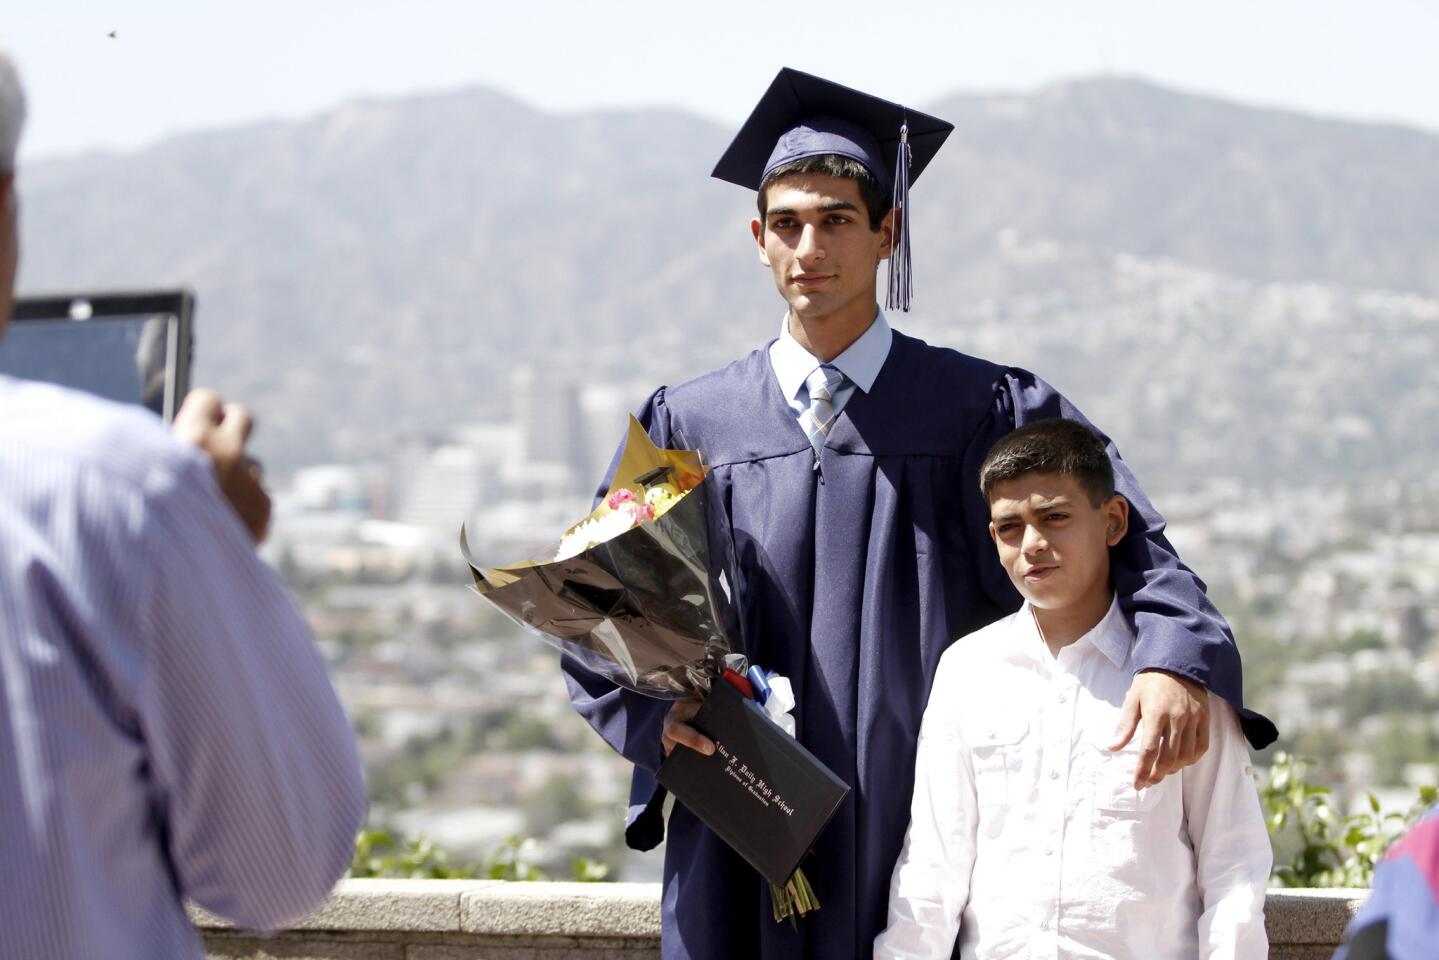 Photo Gallery: Daily High, Reconnected Glendale and Verdugo Academy High School commencement ceremony